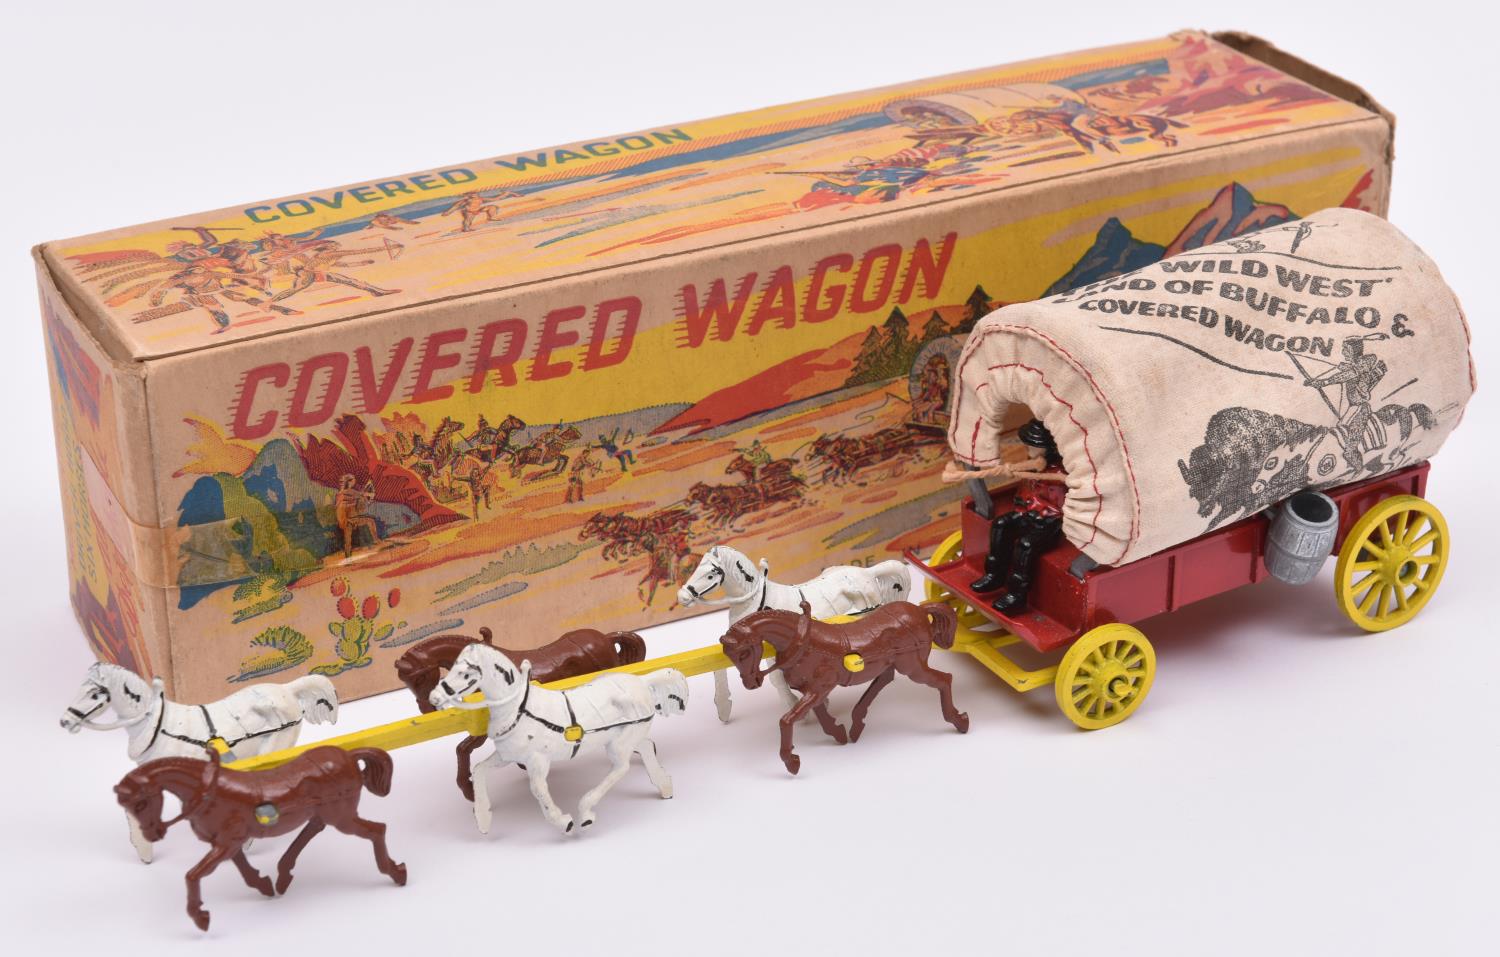 A Modern Products Covered Wagon. In red with yellow wheels, six horses, pictured tilt, red painted - Image 2 of 2